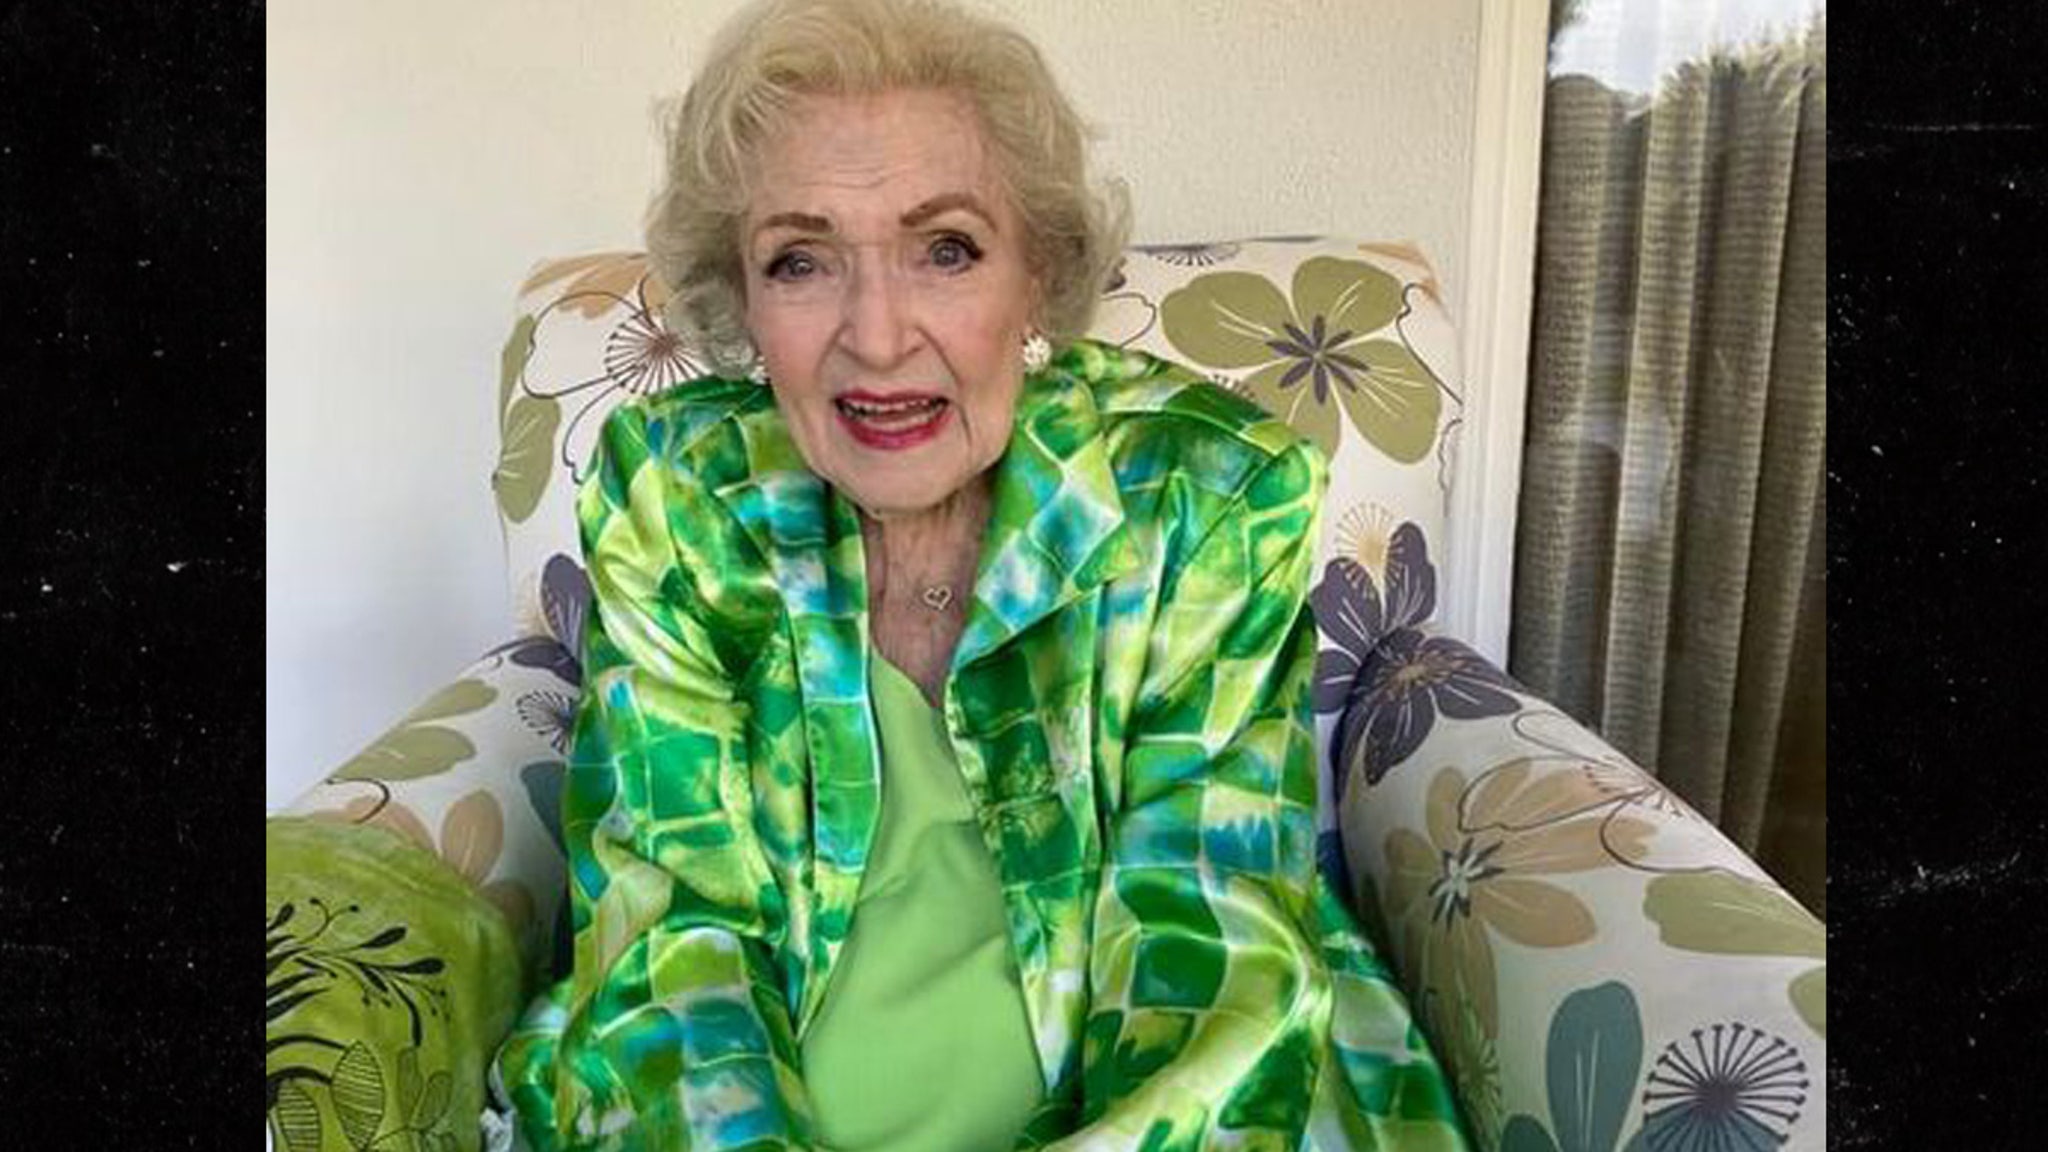 Betty White's Assistant Posts One of the Last Photographs of Her Before Death thumbnail